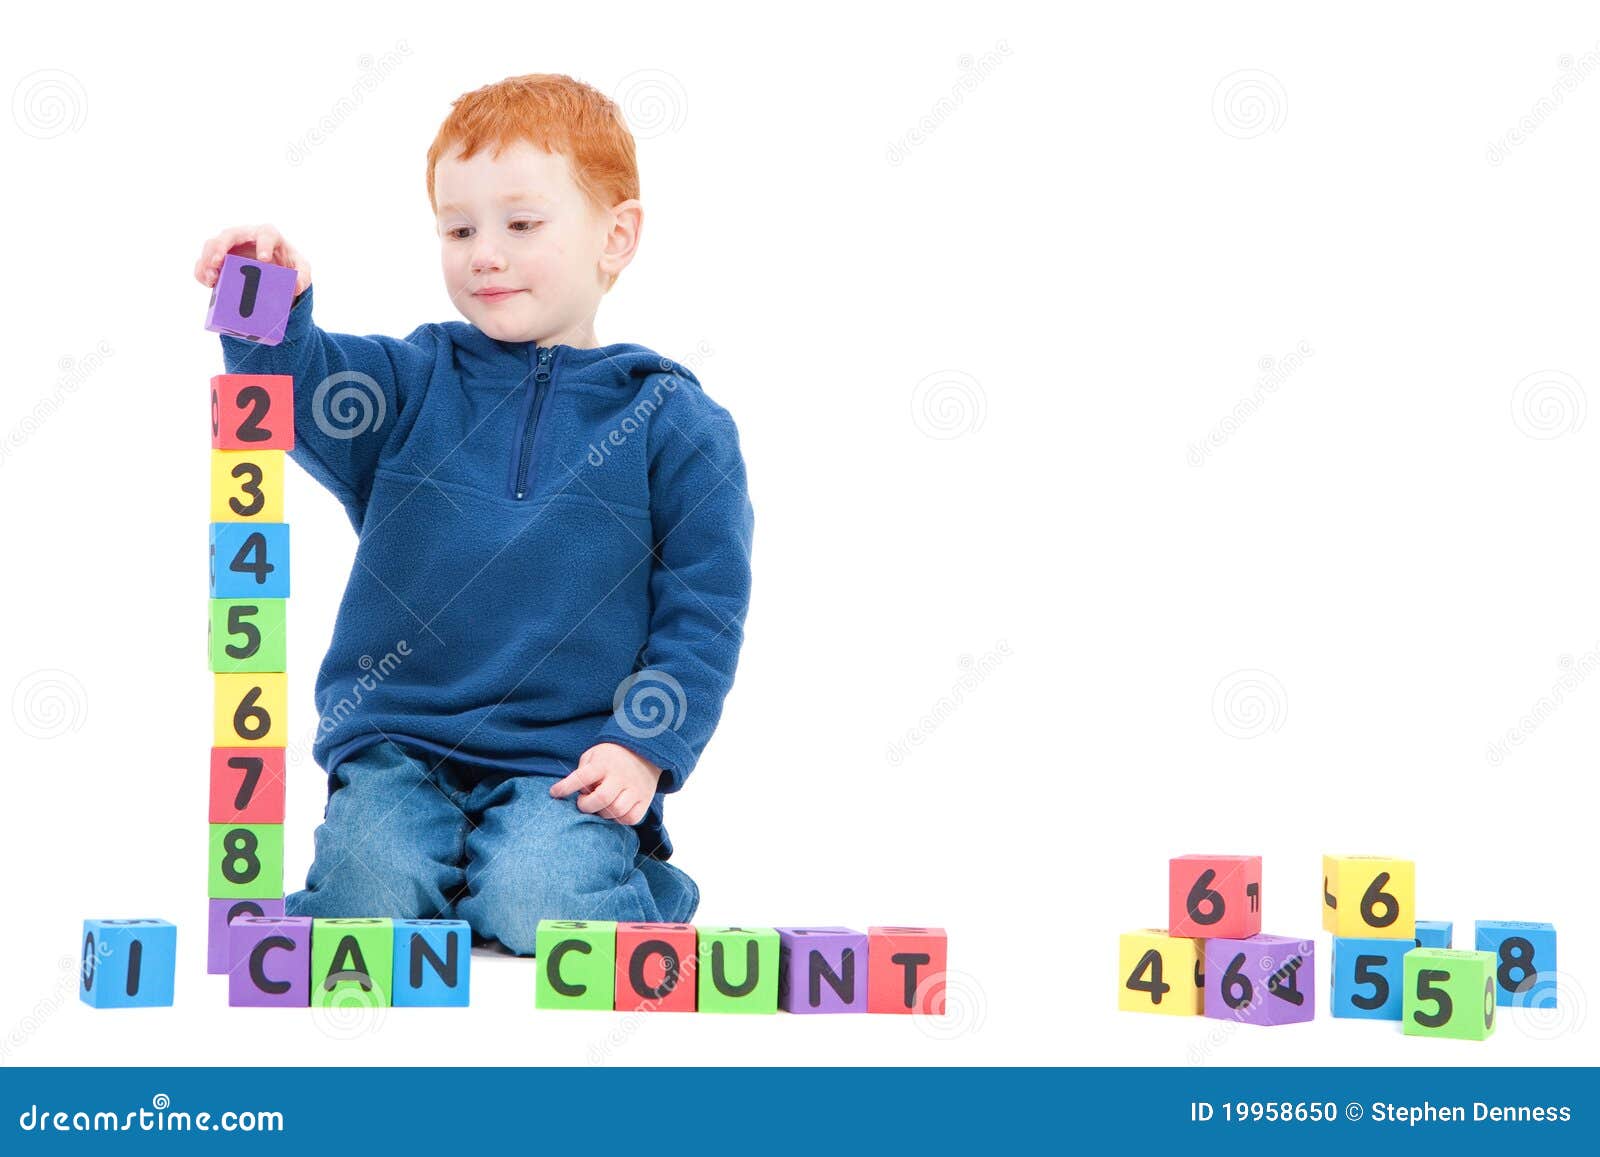 Counting Numbers 1 2 3 4 5 White Number Wooden On Red Background With